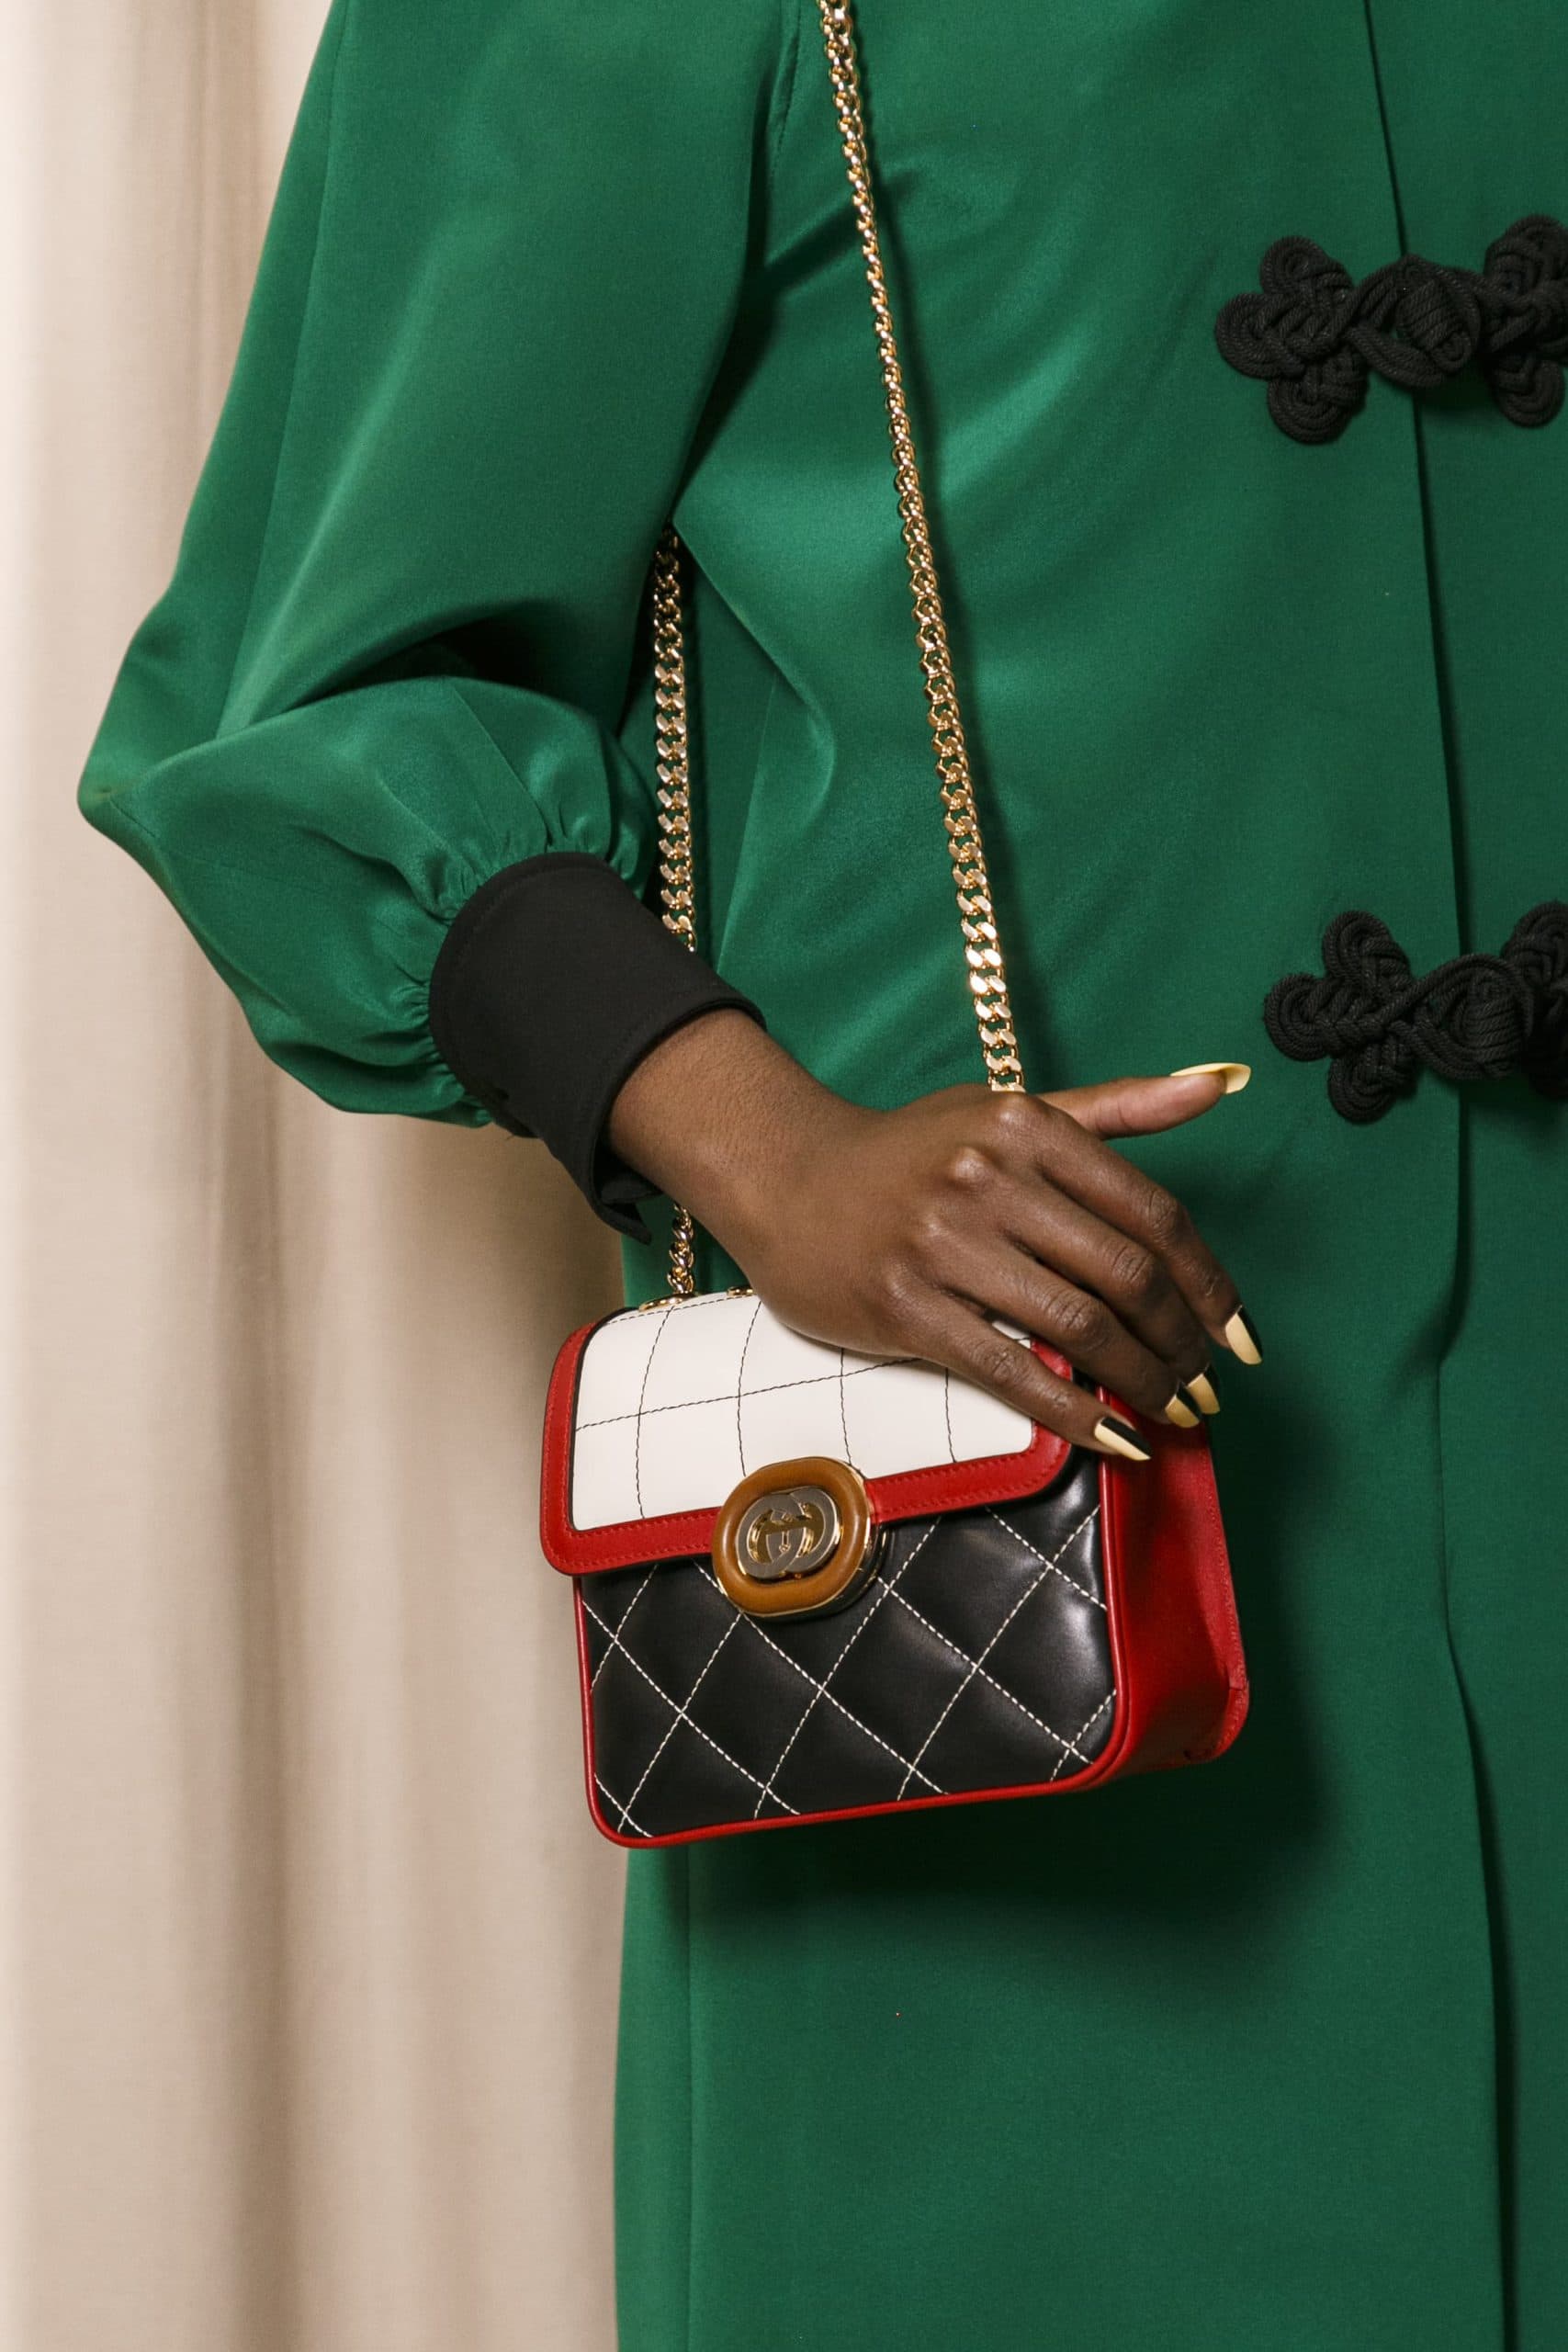 Gucci cross-body: A Practical Bag and Fashion Statement – Onpost